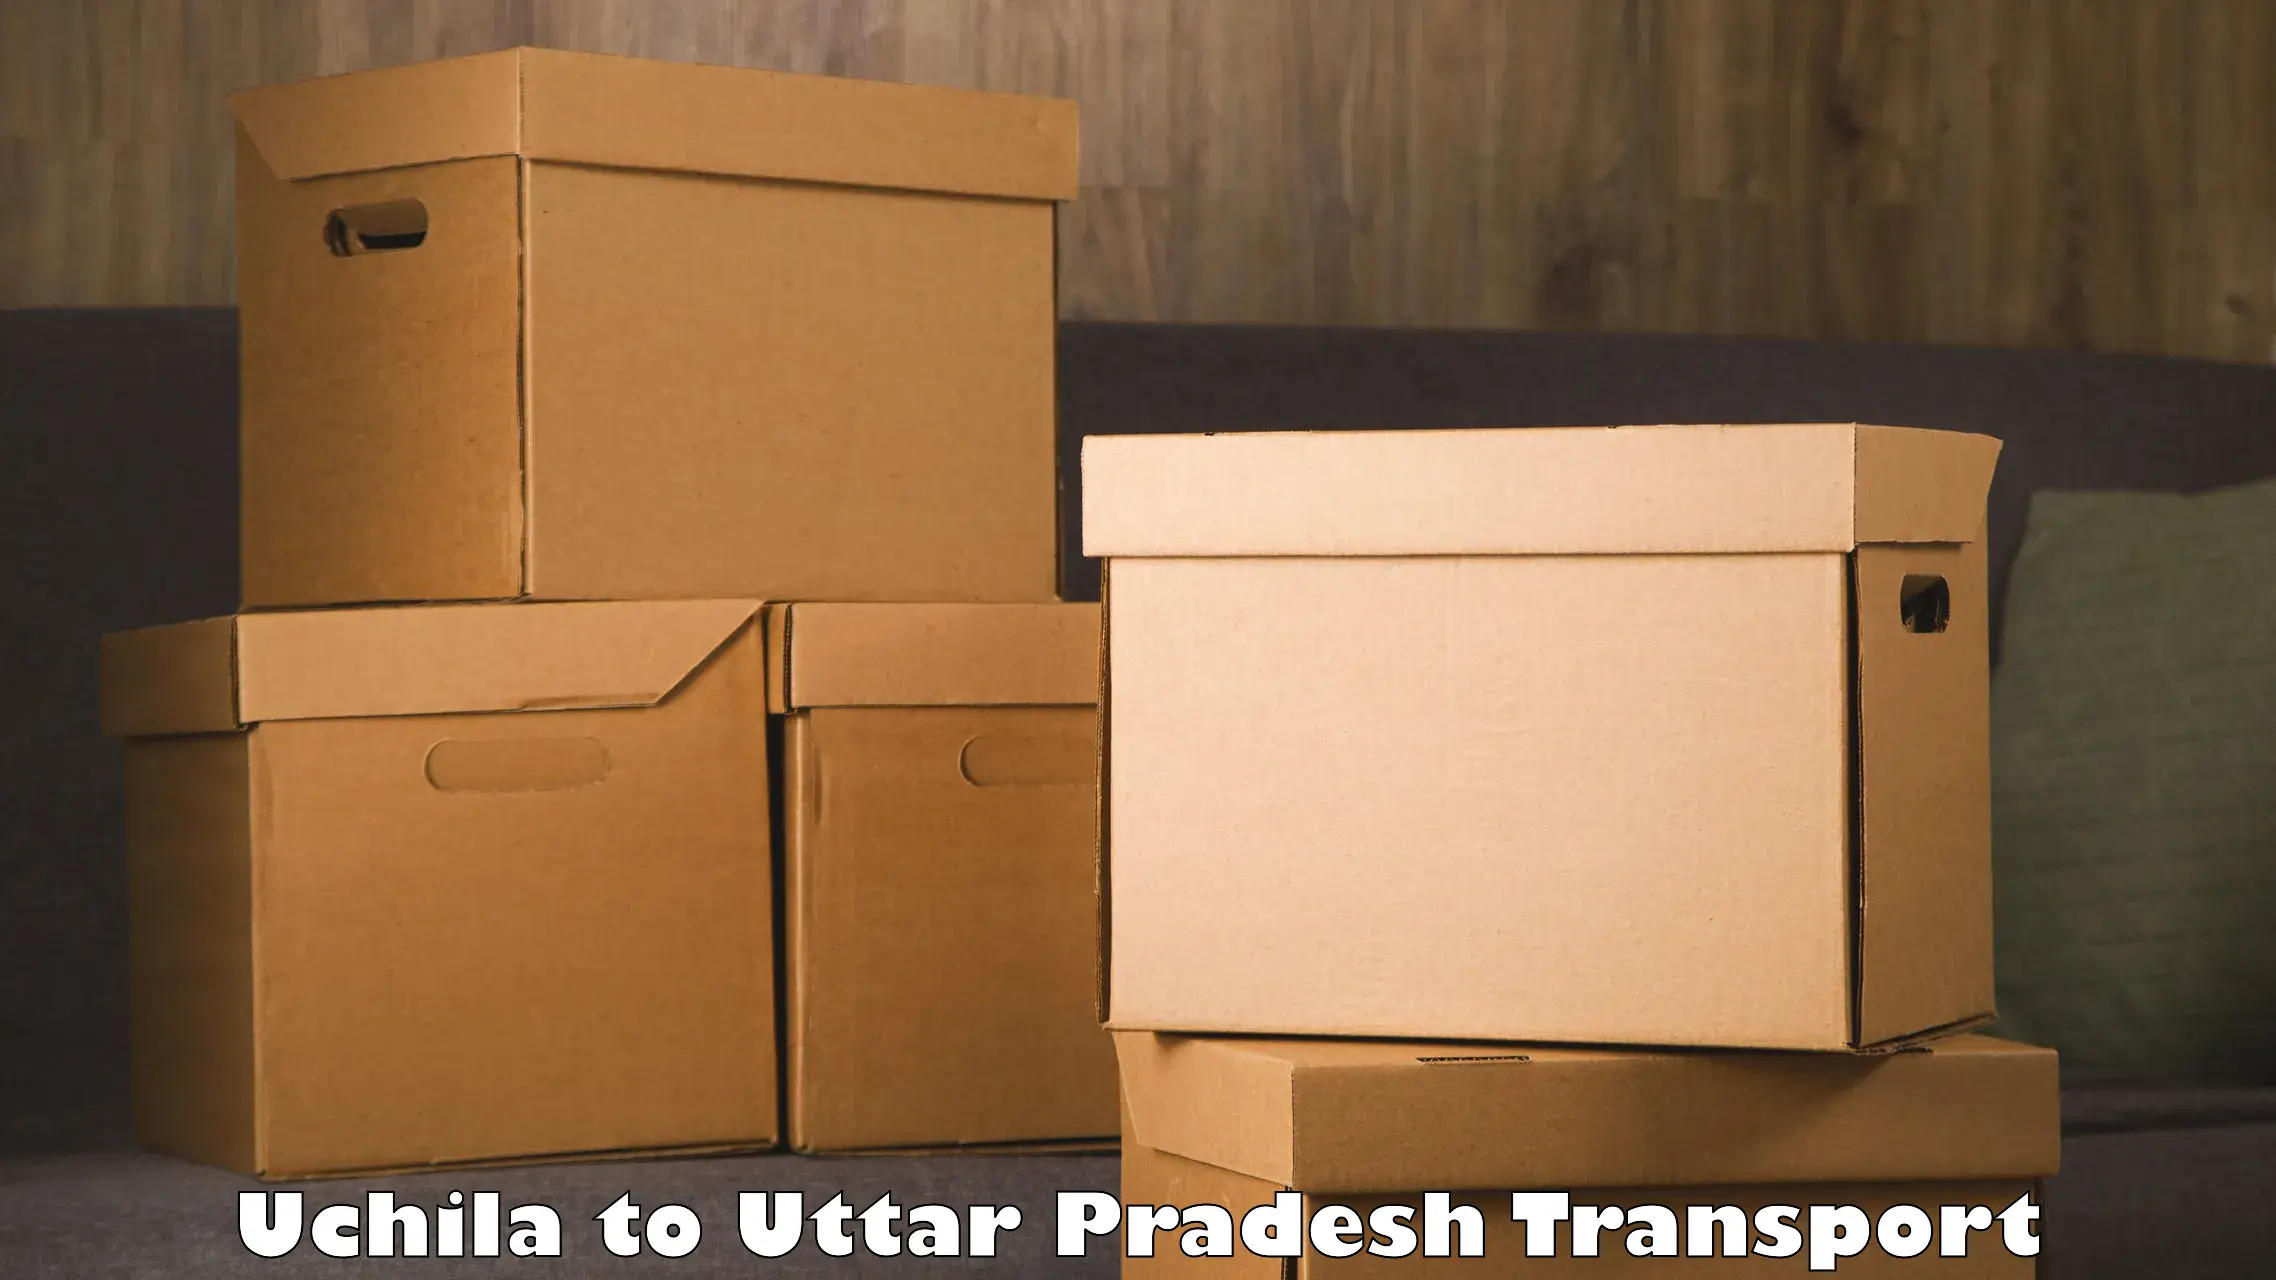 Air cargo transport services in Uchila to Fatehabad Agra